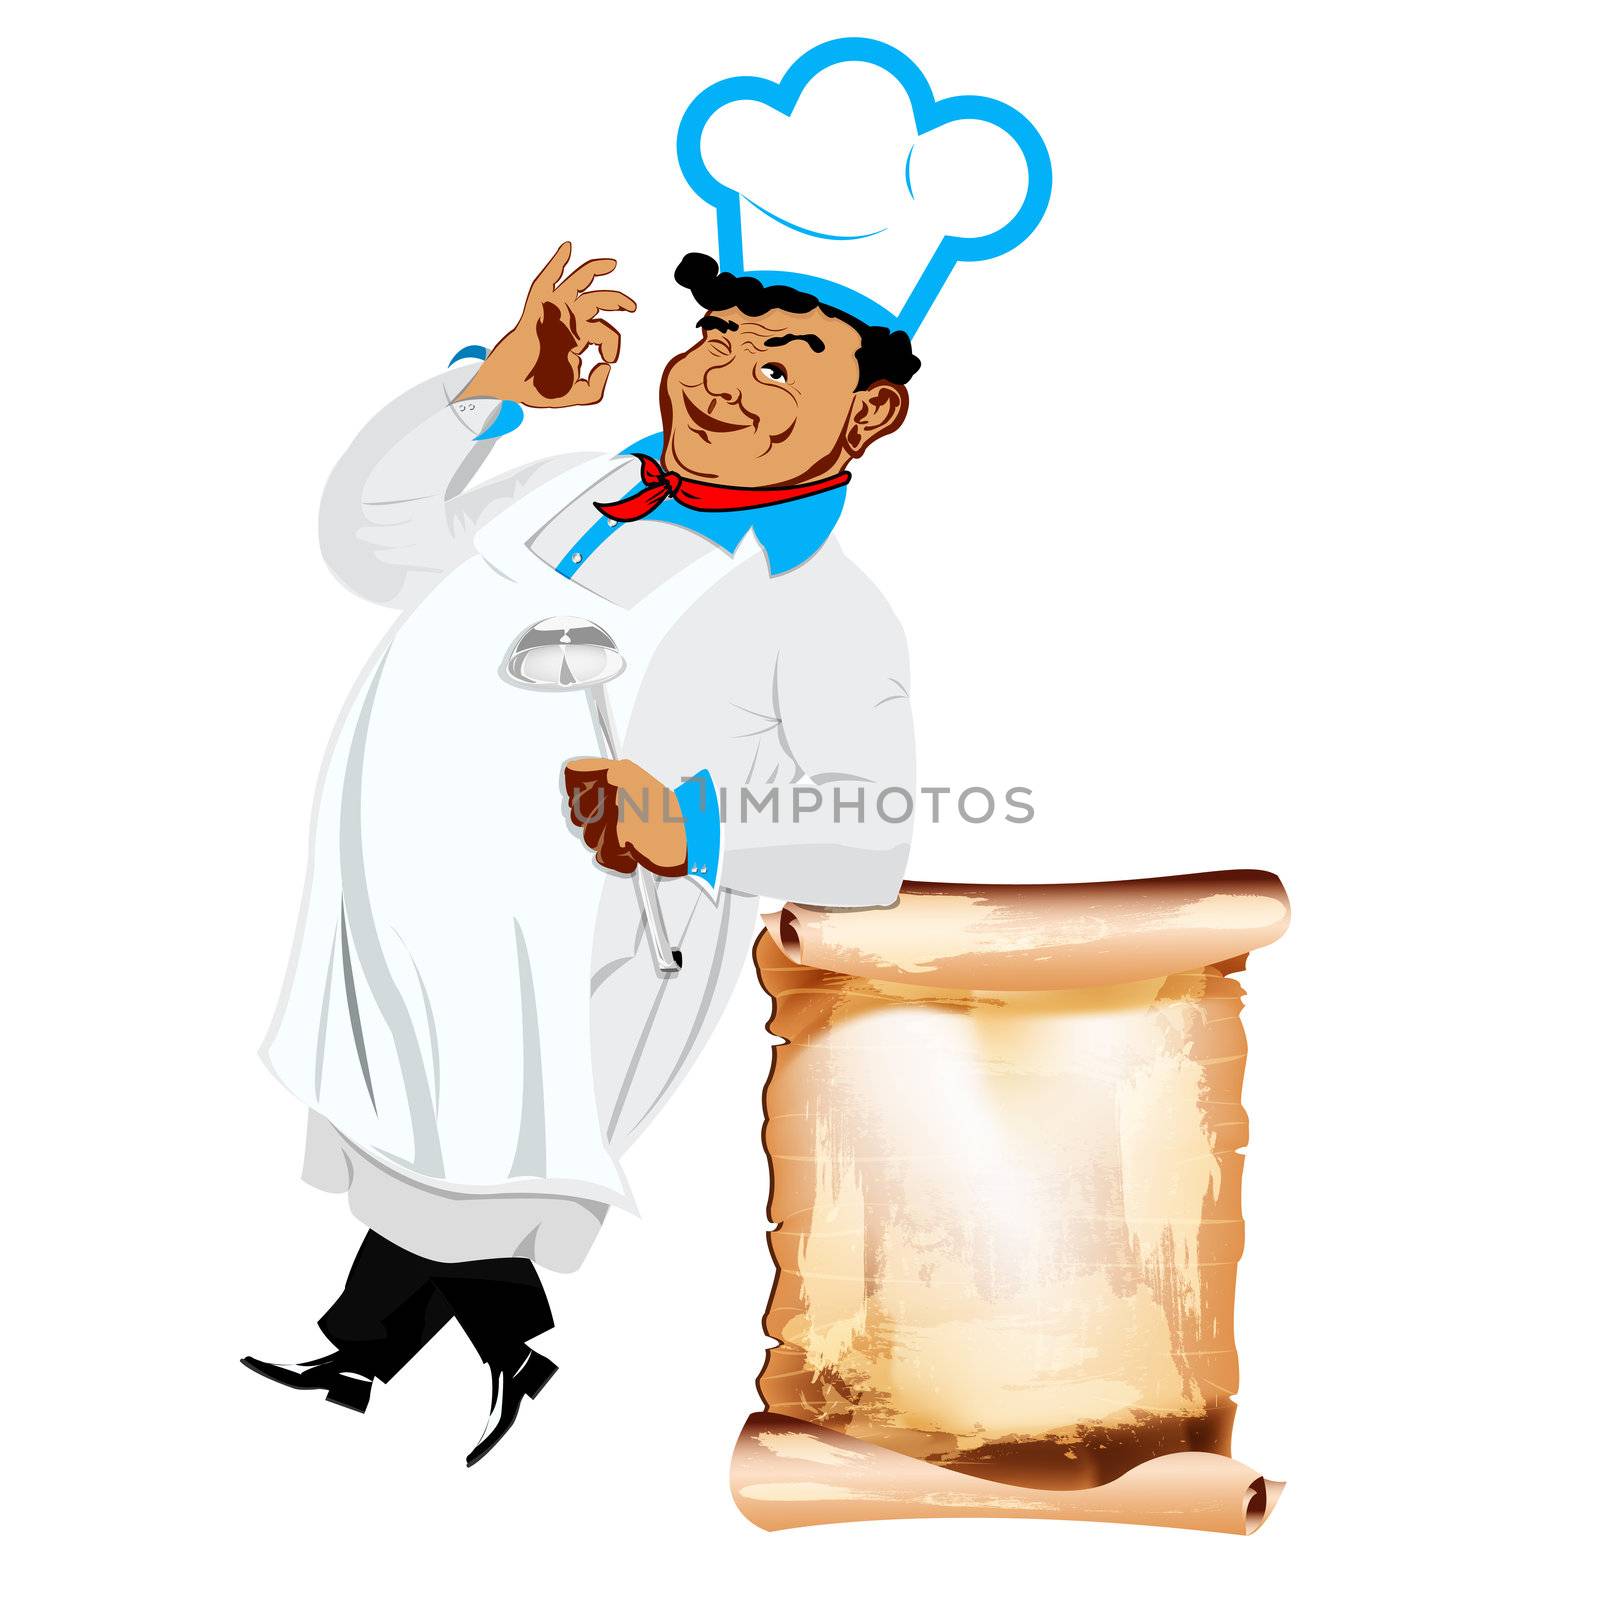 Funny happy Chef and menu on a white background